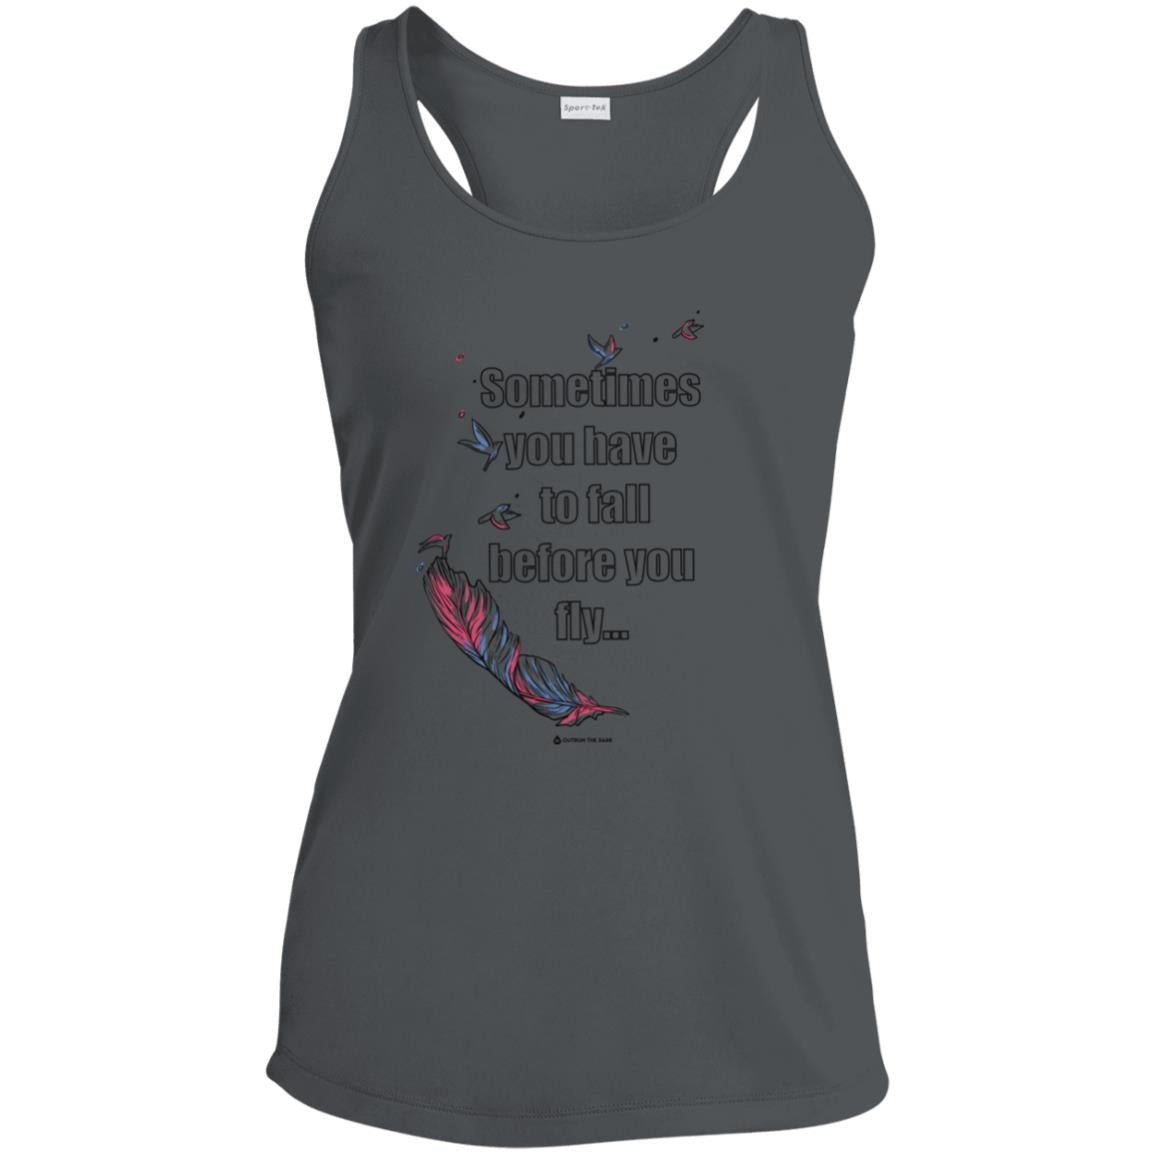 Before you fly Women's Performance Tanktop